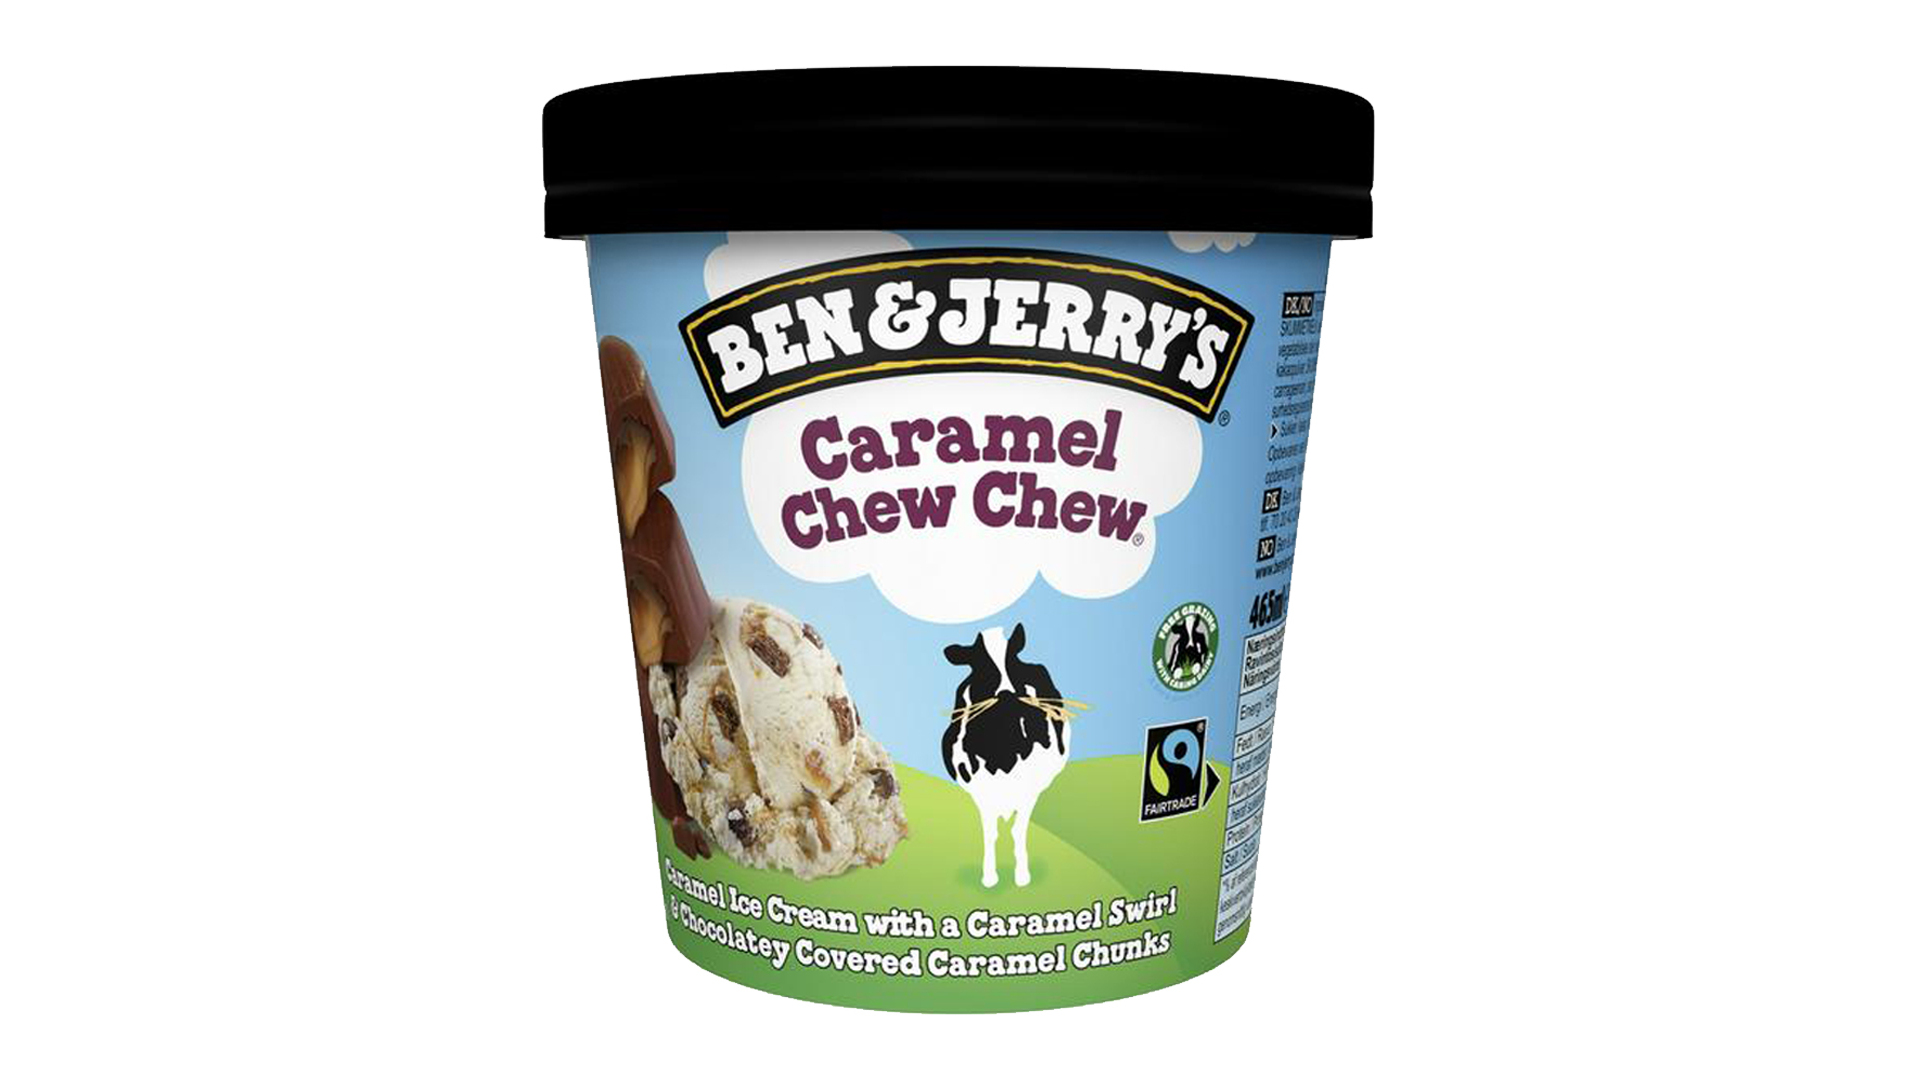 Ben & Jerry's Caramel Chew Chew 500ml - Burger Delivery in South Woodford E18